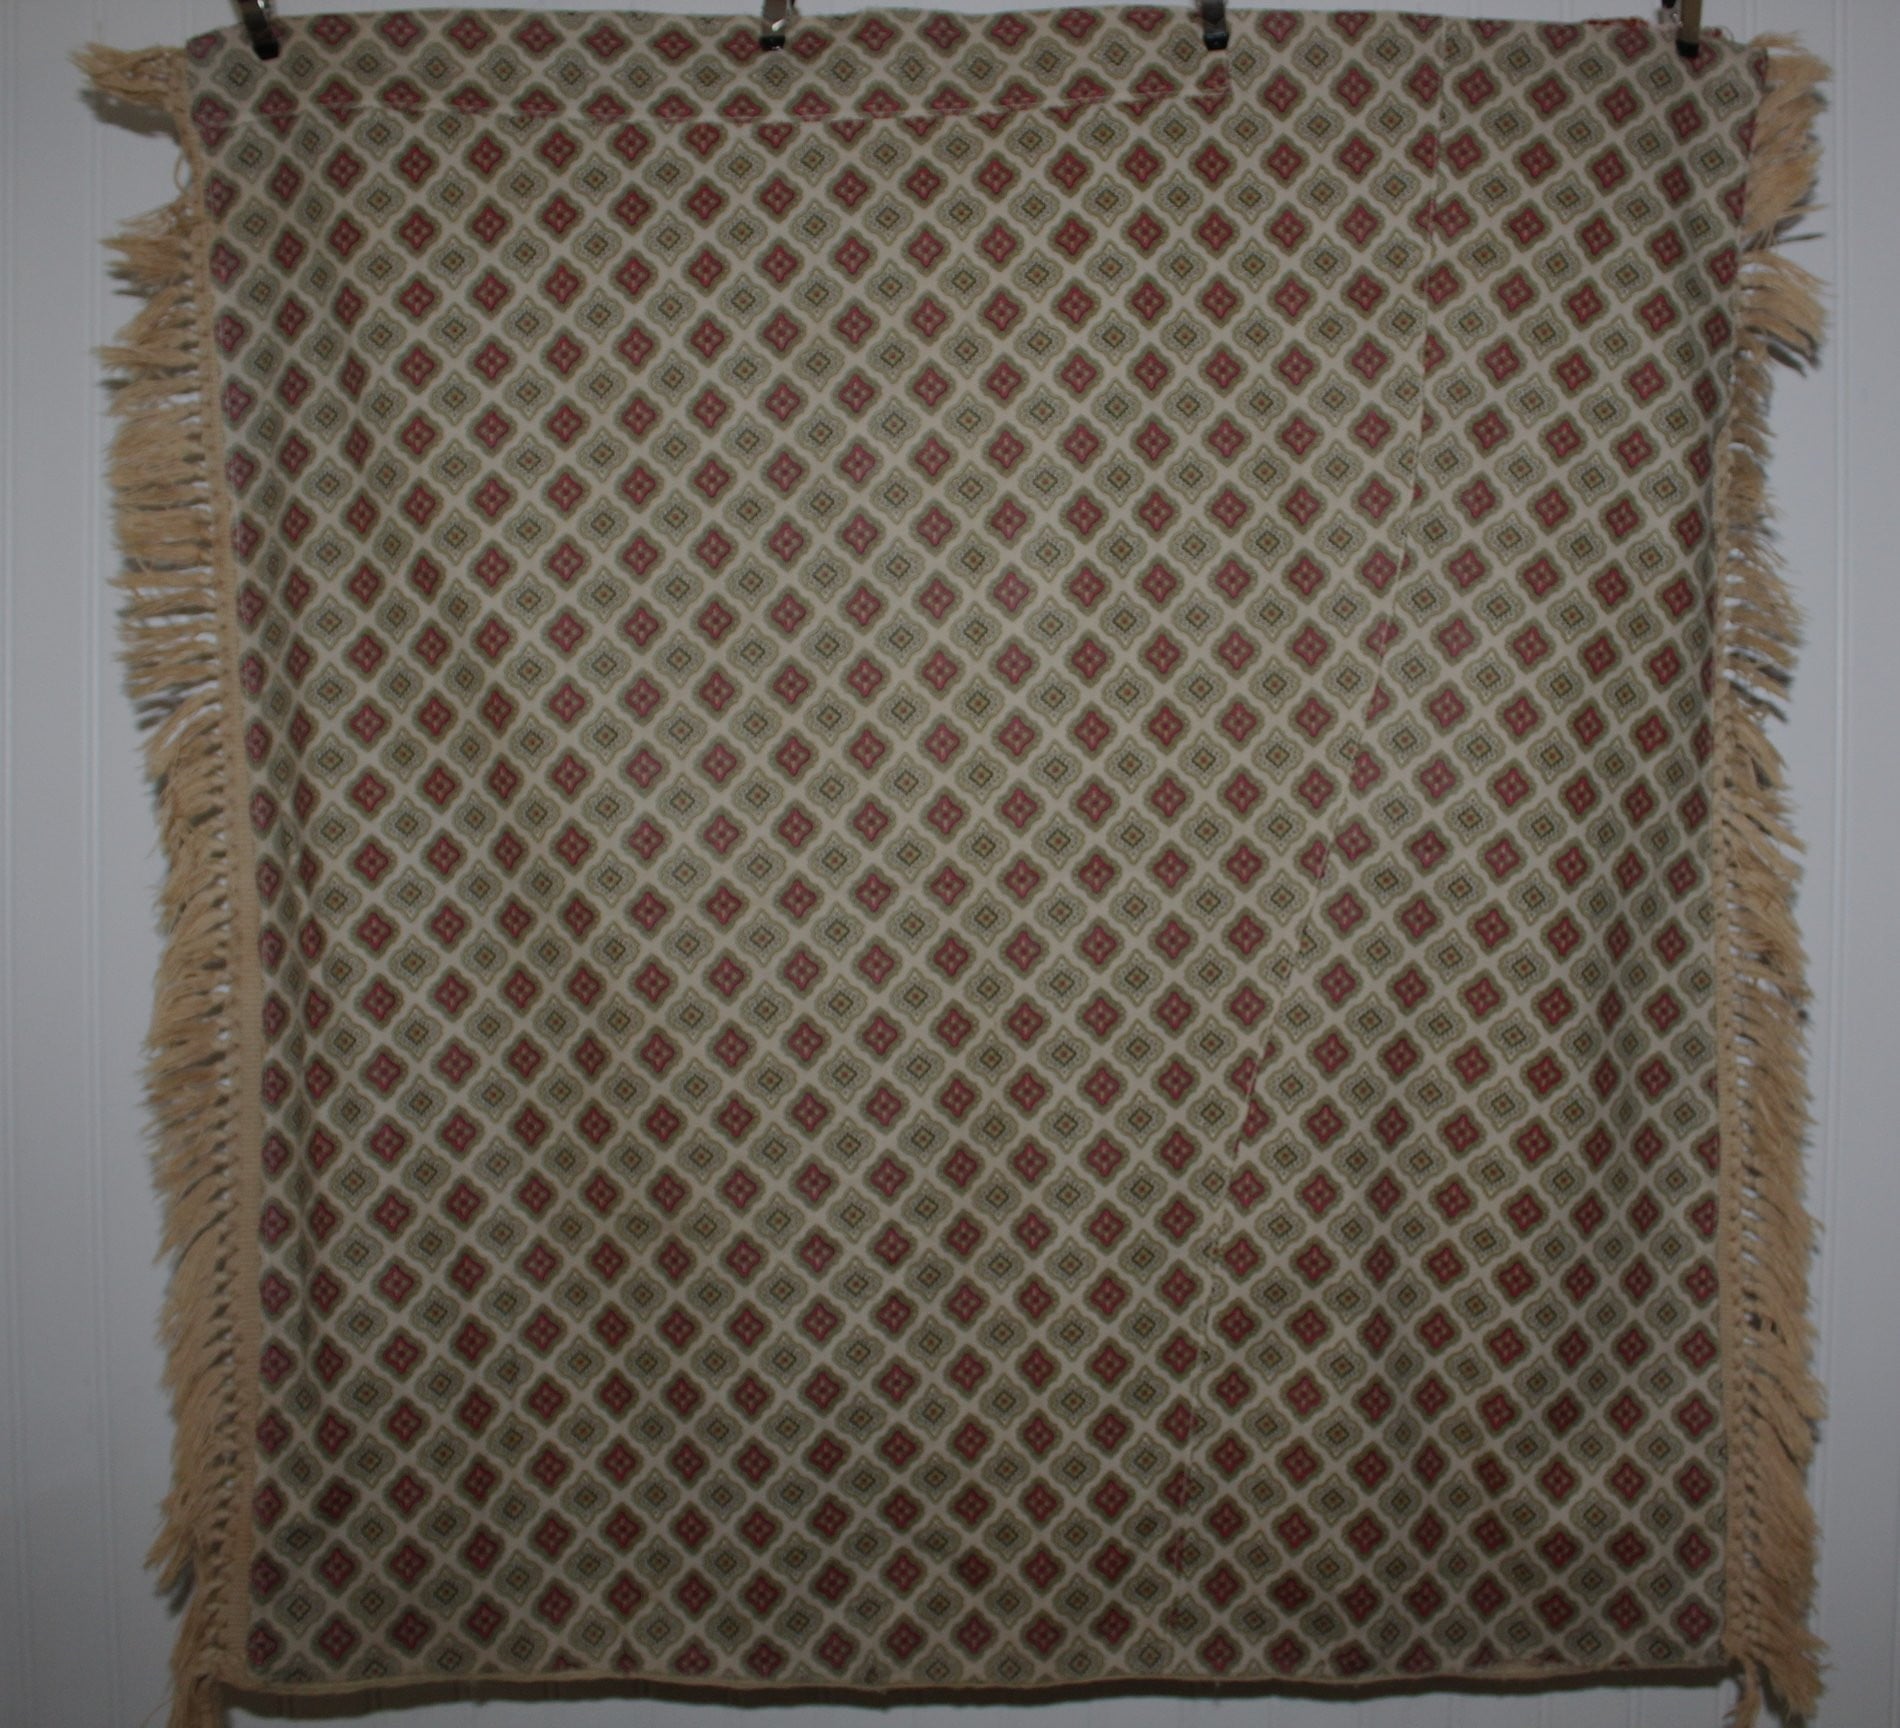 Kilim Large Pillow Cover Wall Decor Vintage Hand Woven Bohemian Chic Eclectic rug